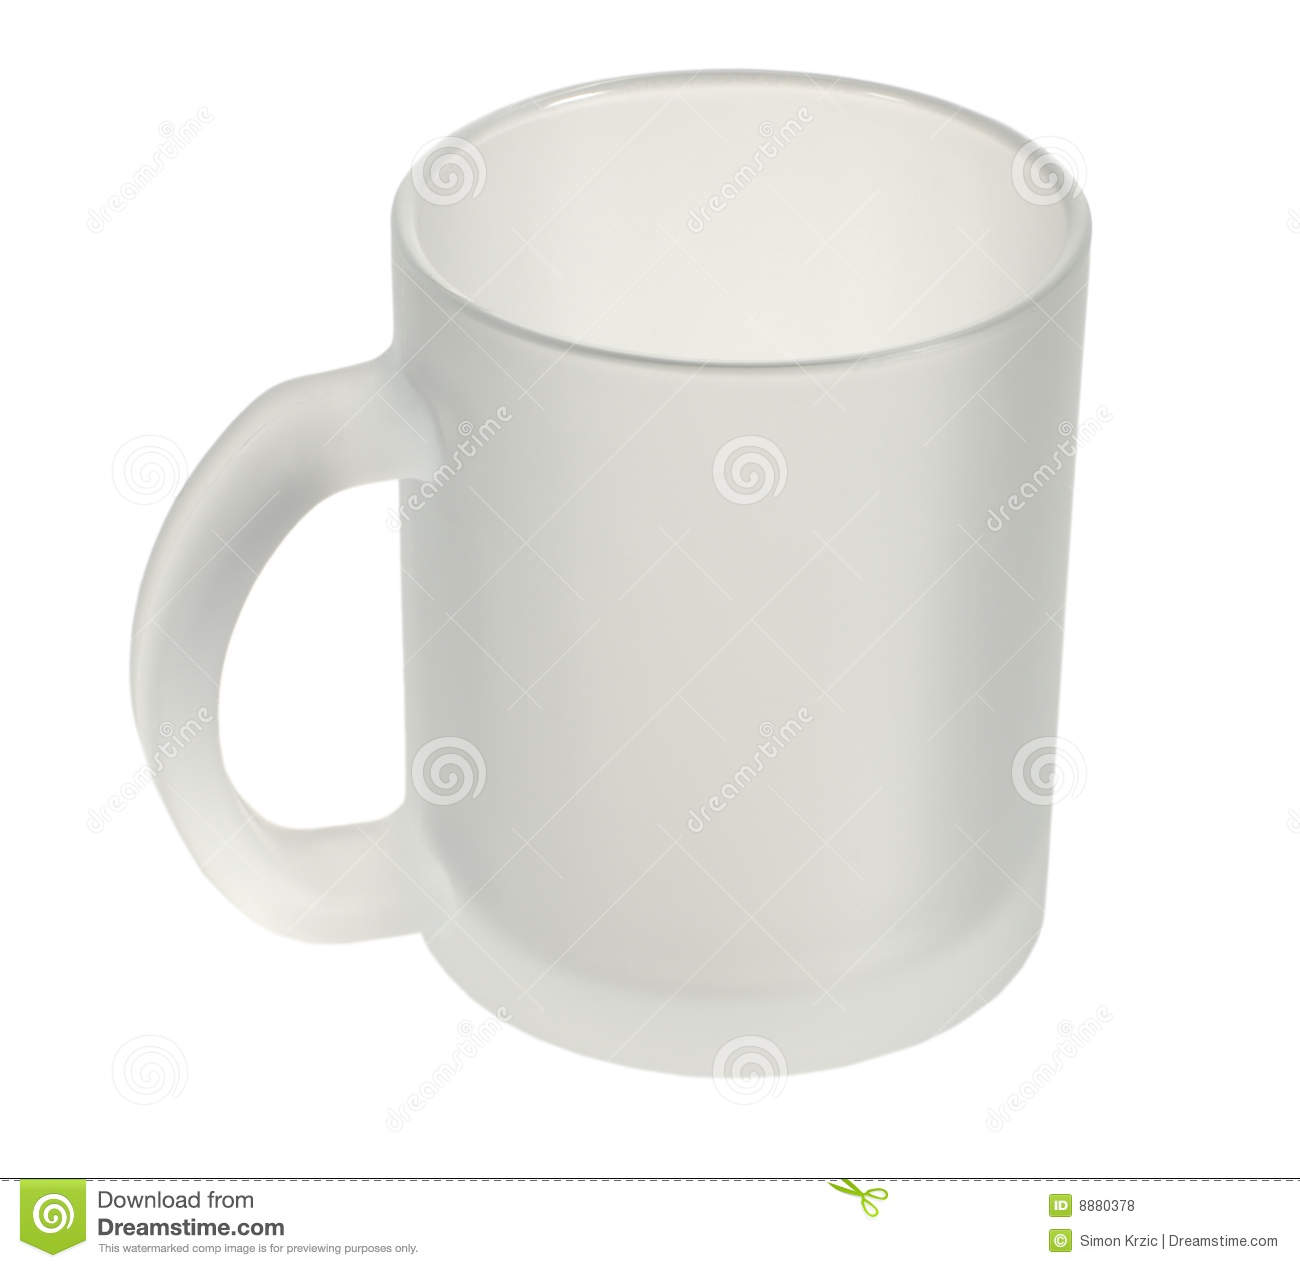 Close Up Of A White Plastic Coffee Cup Isolated On A White Background